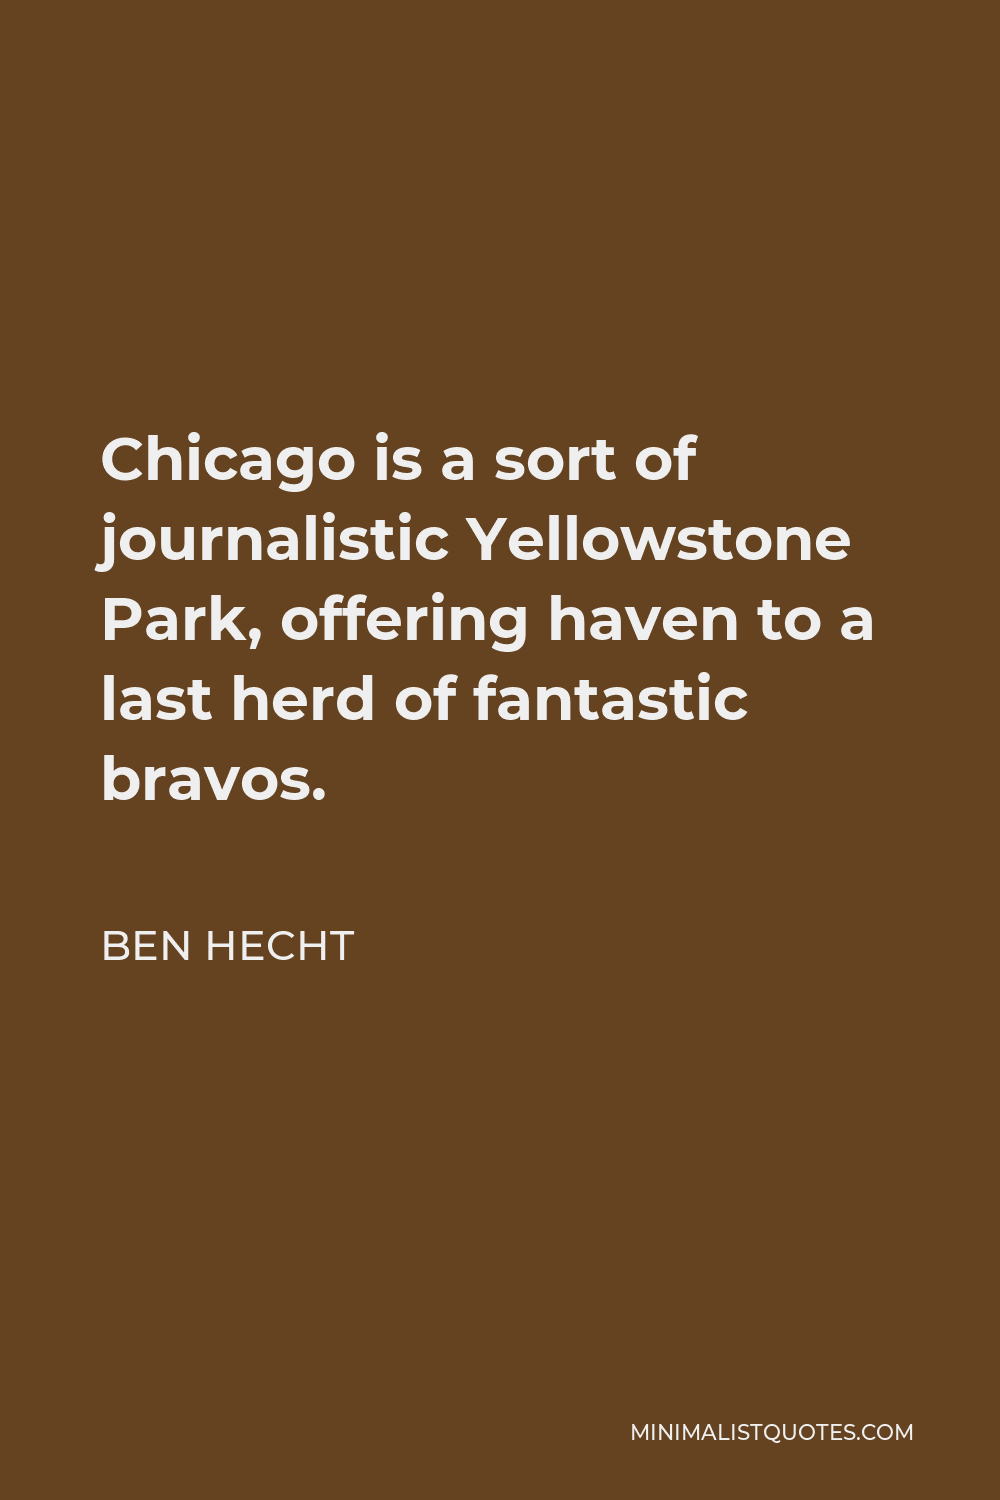 Ben Hecht Quote - Chicago is a sort of journalistic Yellowstone Park, offering haven to a last herd of fantastic bravos.